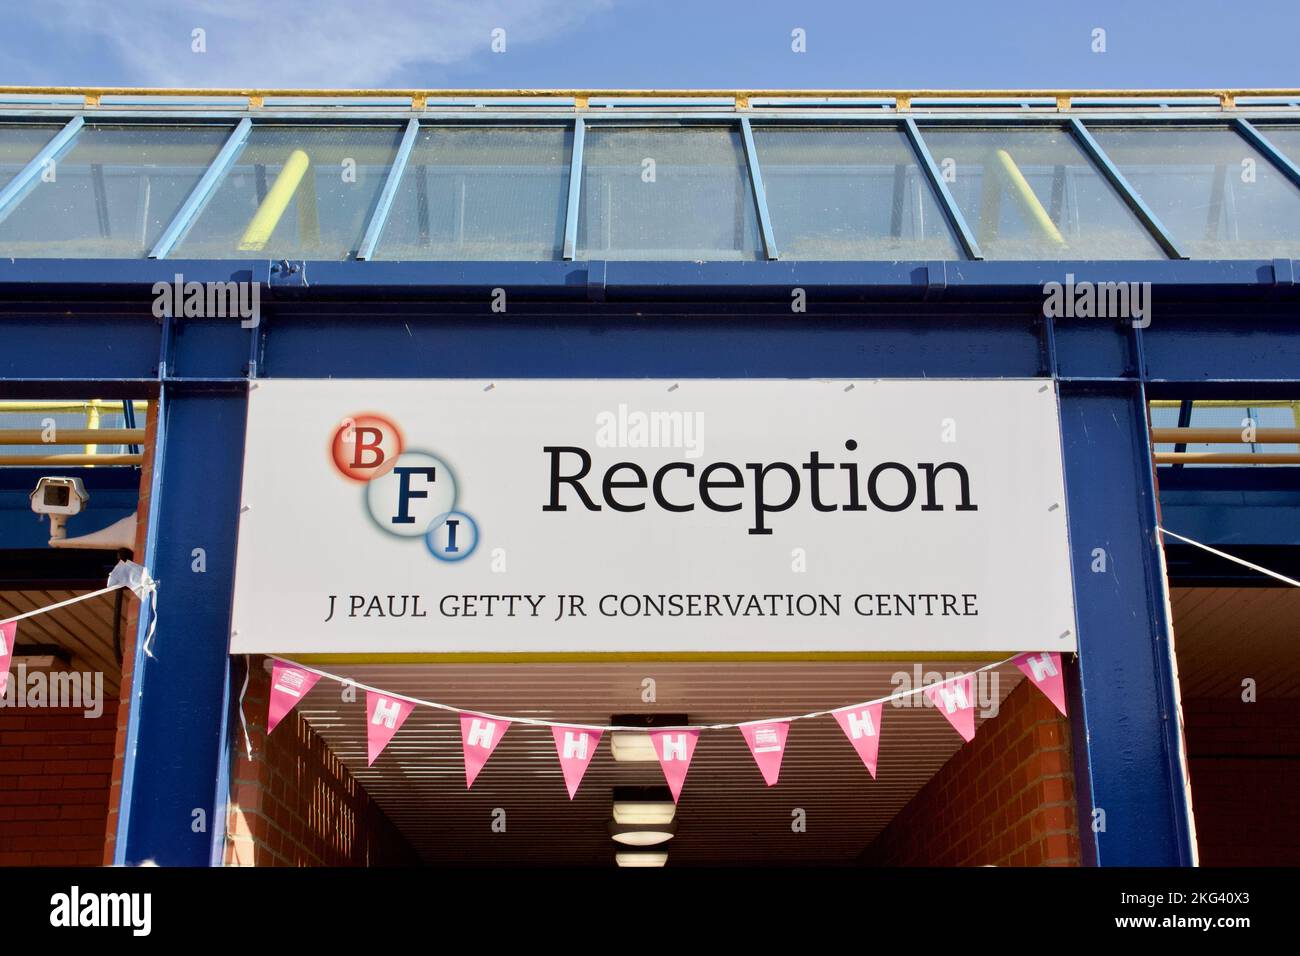 BFI reception to the J. Paul Getty Jr. conservation centre at the BFI National Archive in Berkhamsted Stock Photo